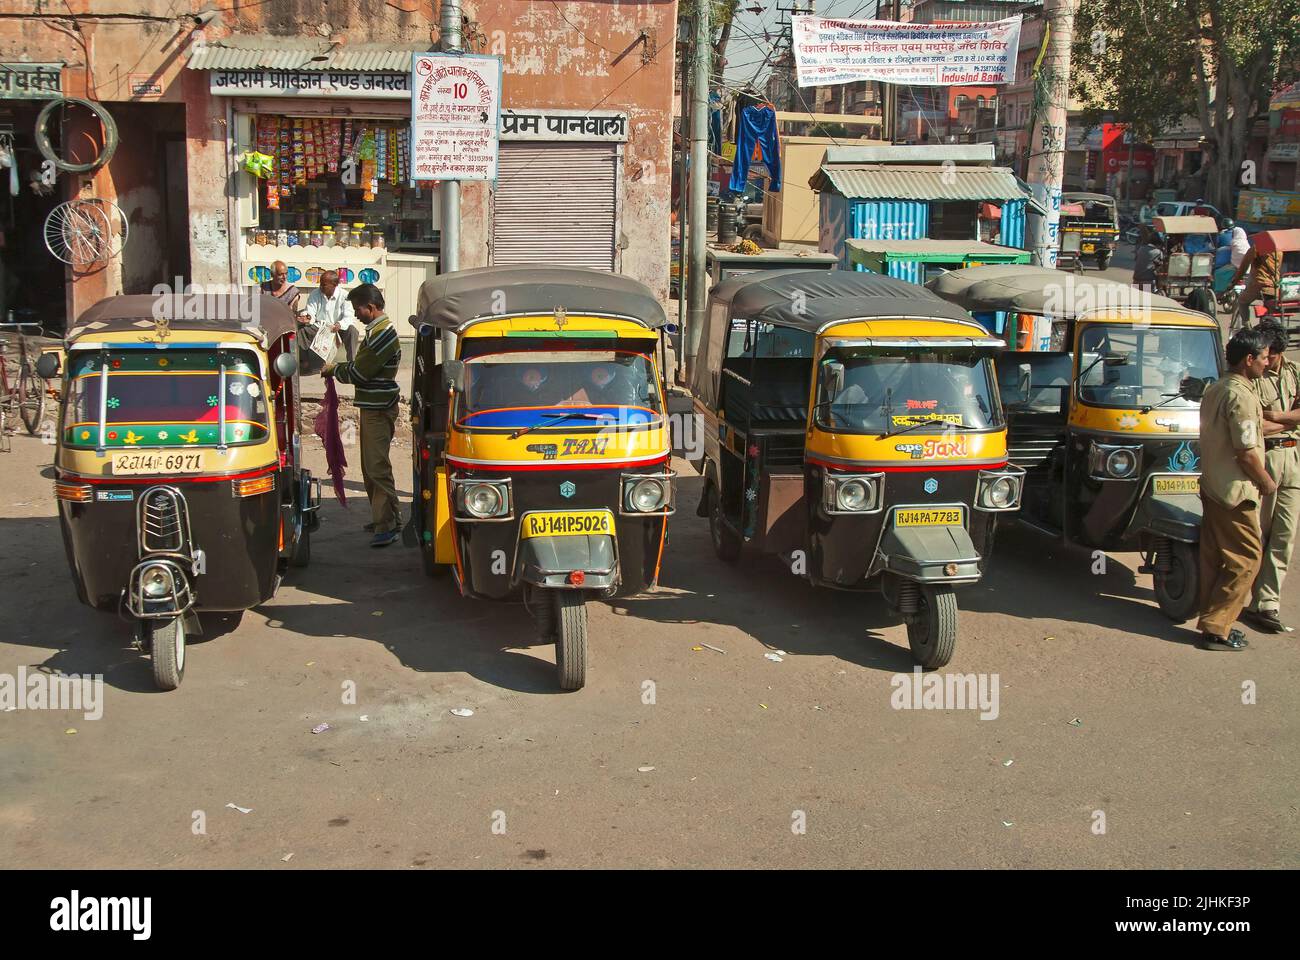 Tuk tuk taxis waiting for passengers on the street Stock Photo